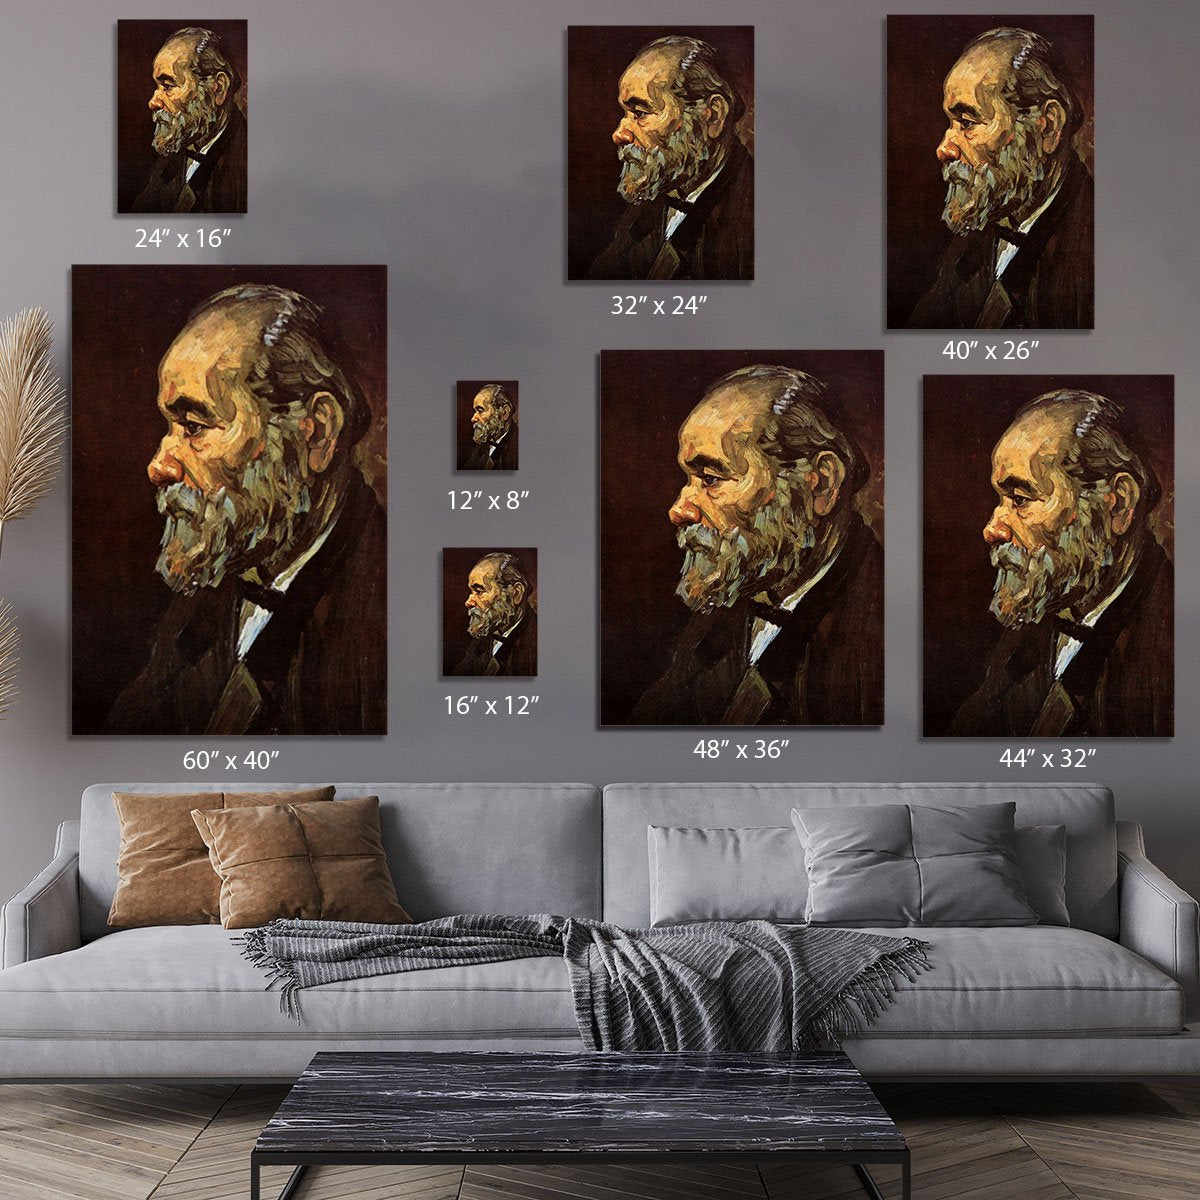 Portrait of an Old Man with Beard by Van Gogh Canvas Print or Poster